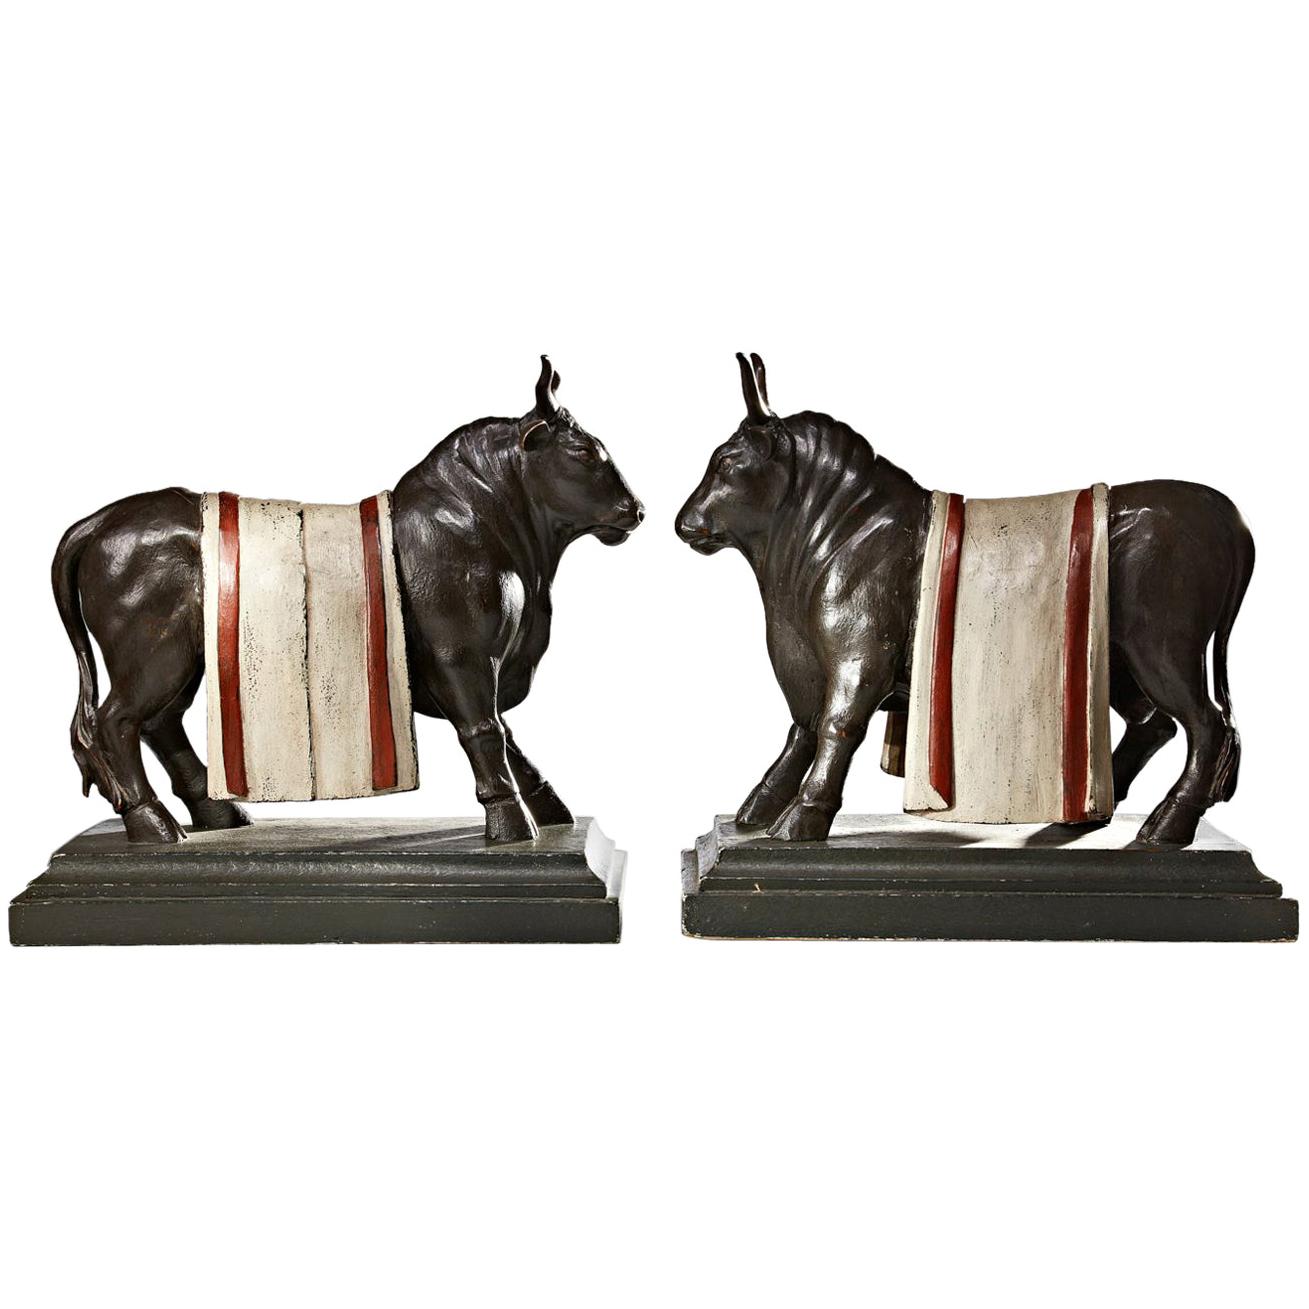 Pair of Carved Wooden Bull Sculptures Europe Circa 1840